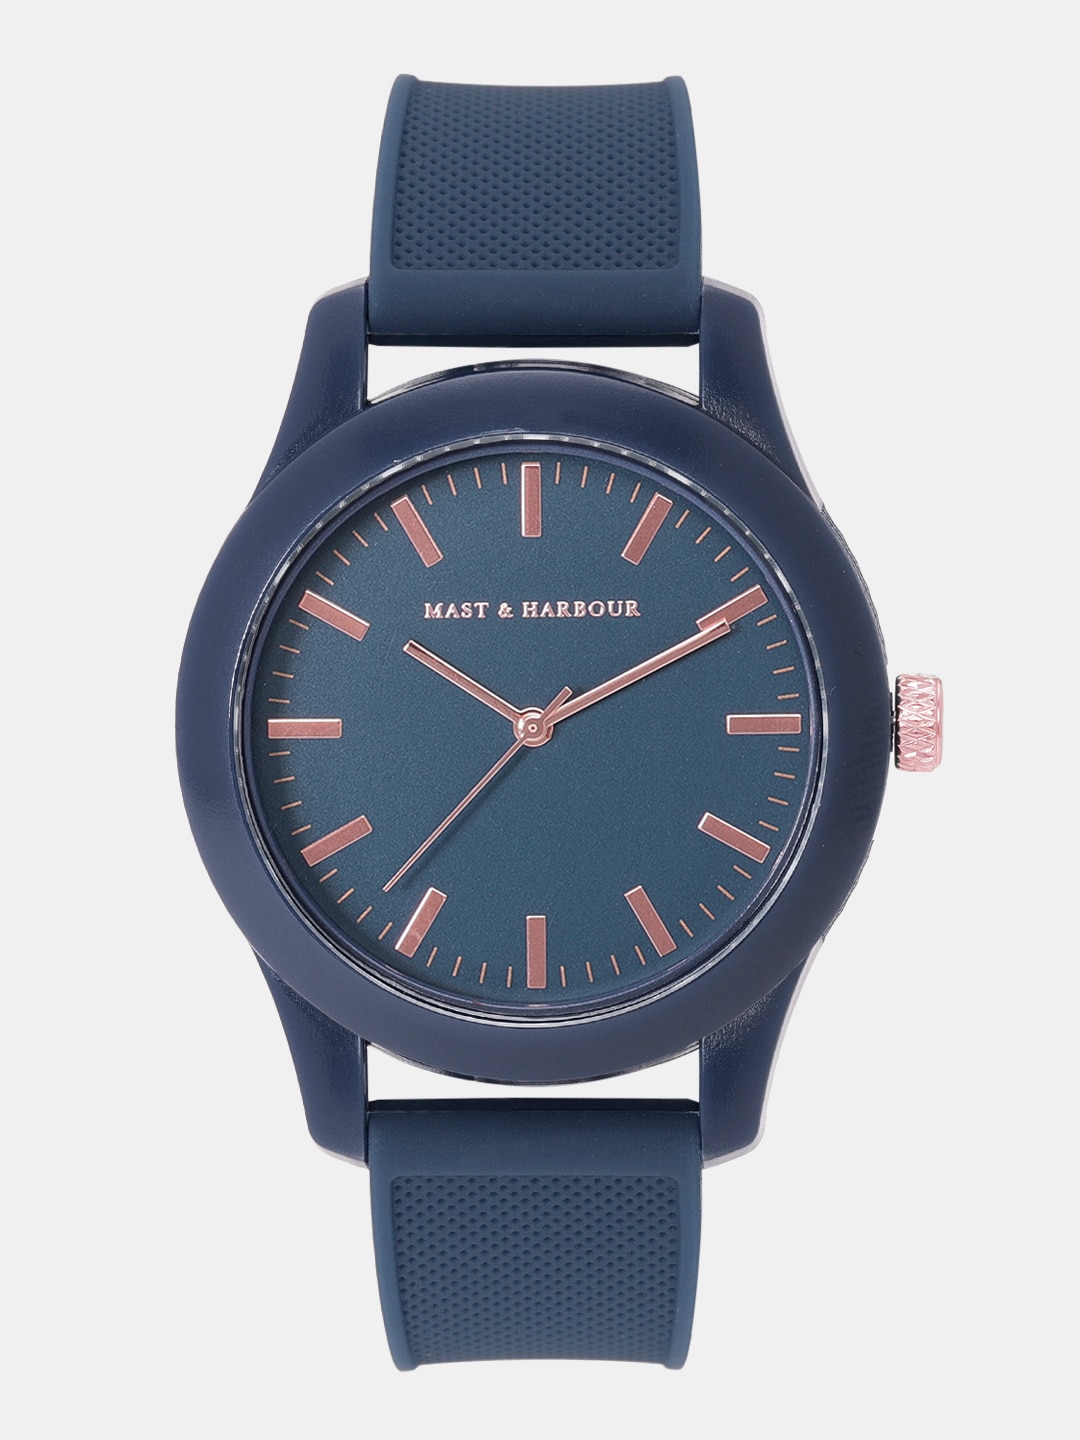 Mast & Harbour Unisex Navy Blue Analogue Watch MFB-PN-SM-32-913 Price in India